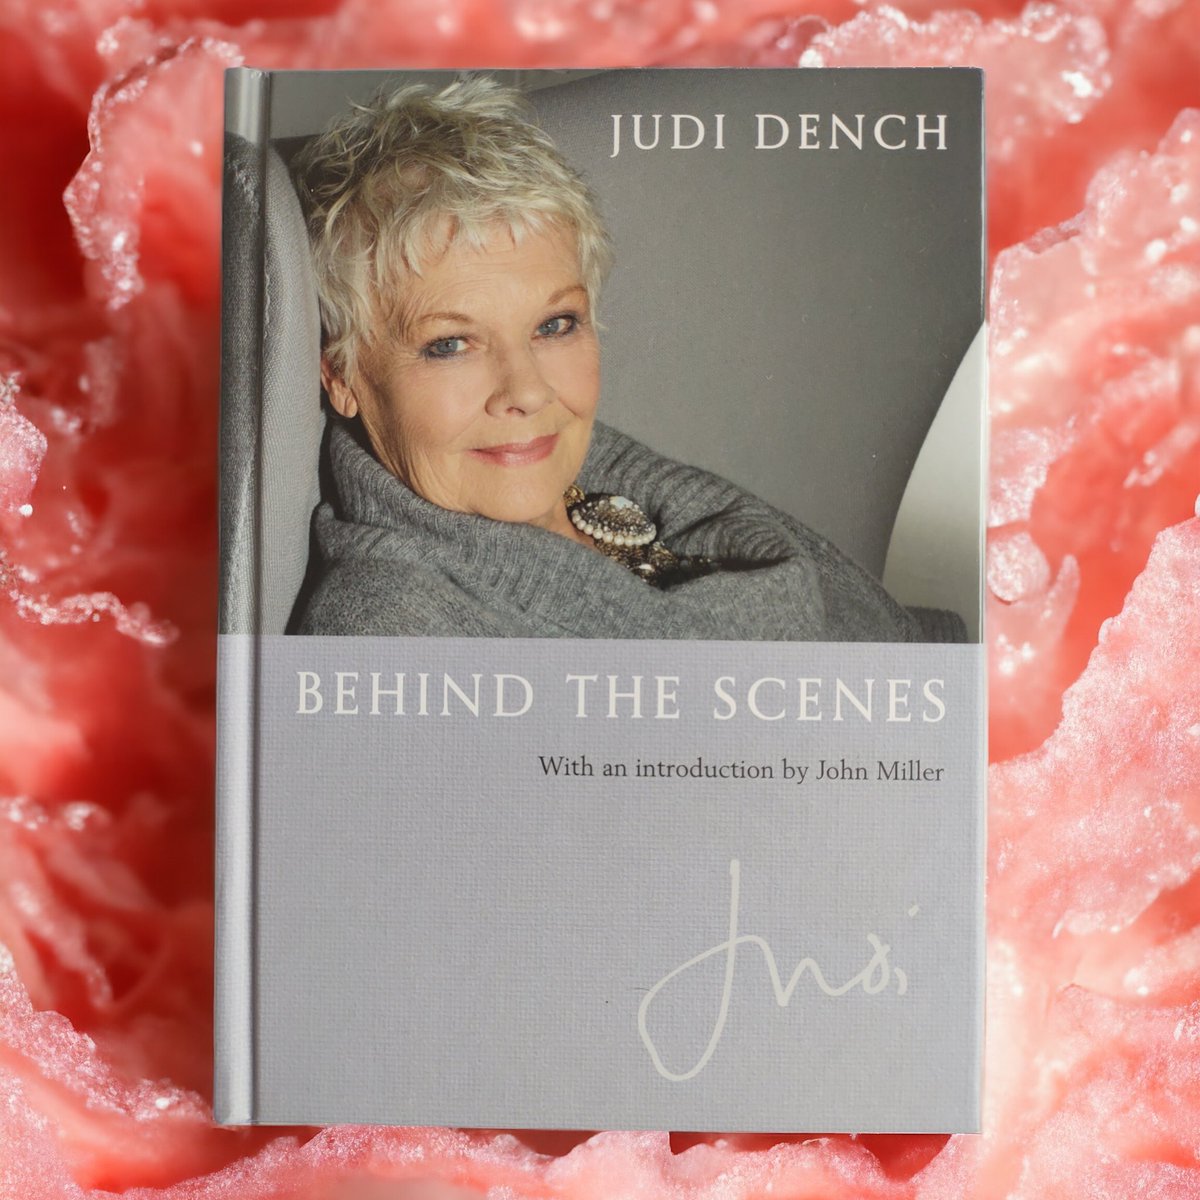 Loved reading this book. Lots of photos as well. #JudiDench #BondMovies